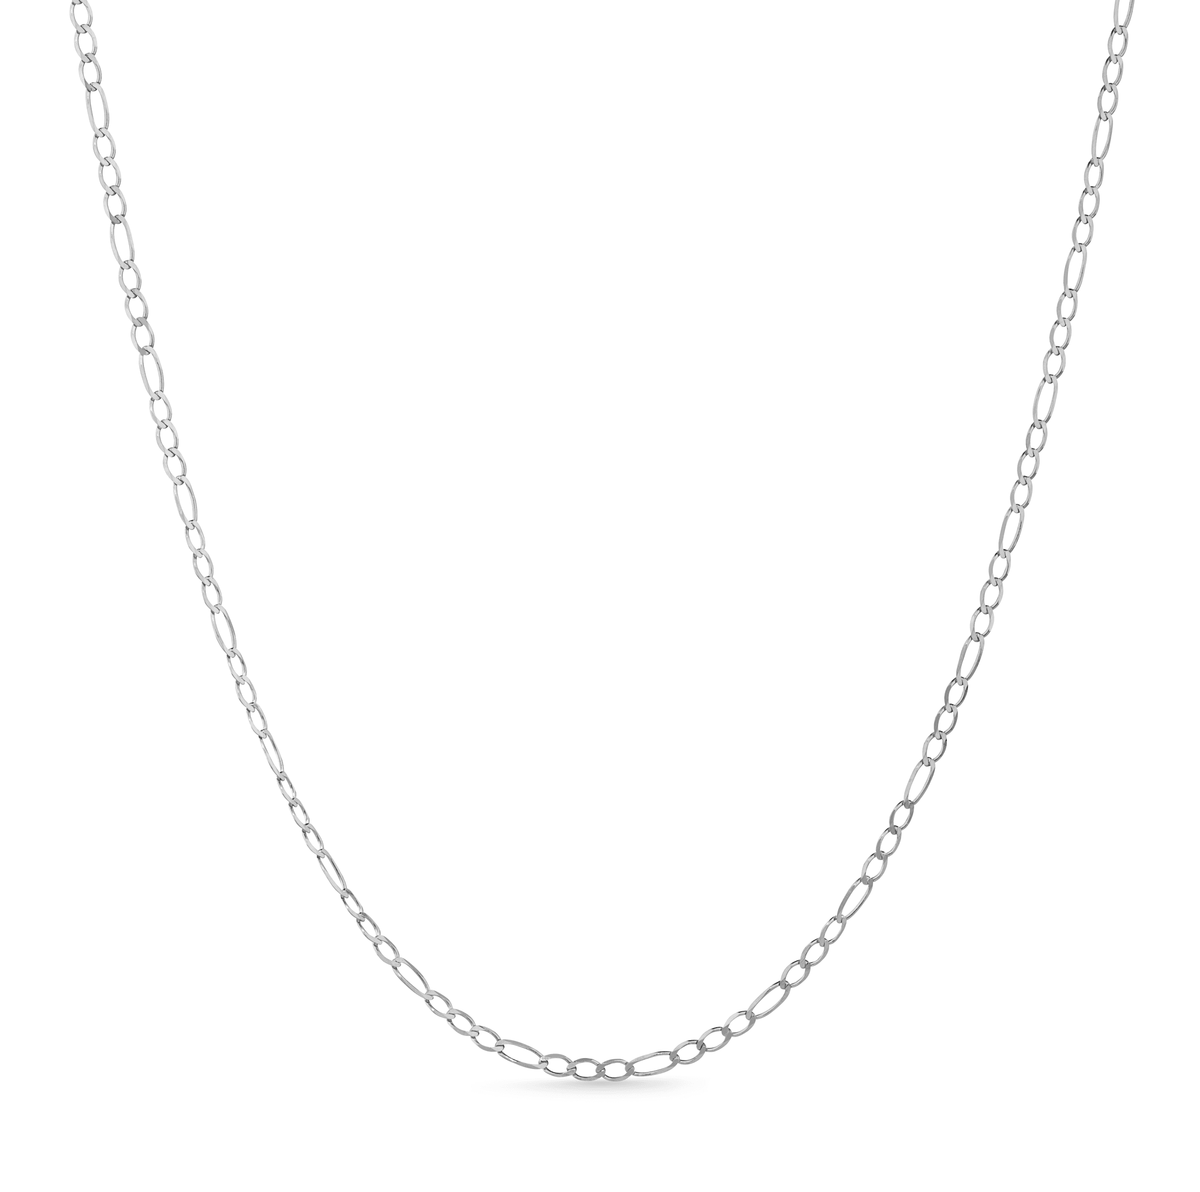 9ct White Gold Figaro Pattern Chain Necklace - Wallace Bishop